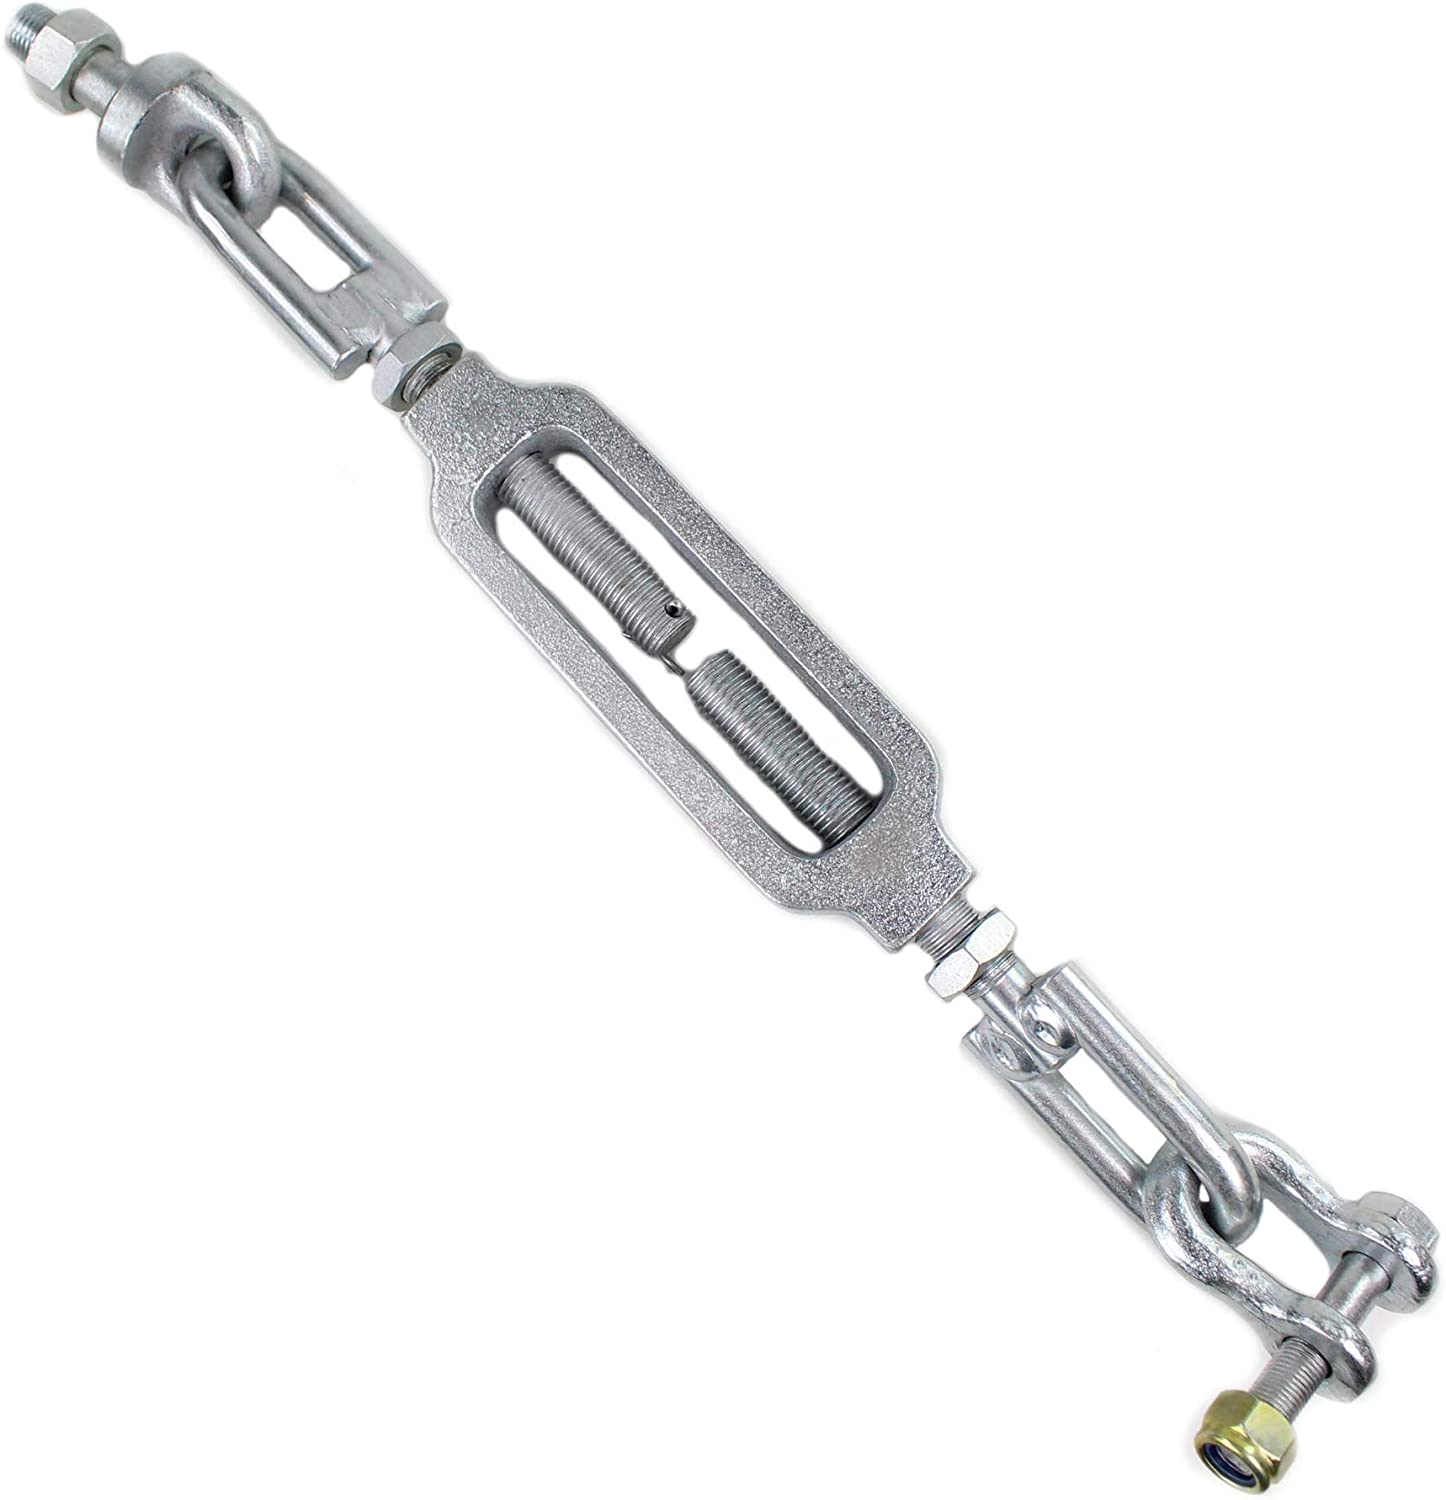 TC832-39702  Check Chain Assembly Fits For Kubota